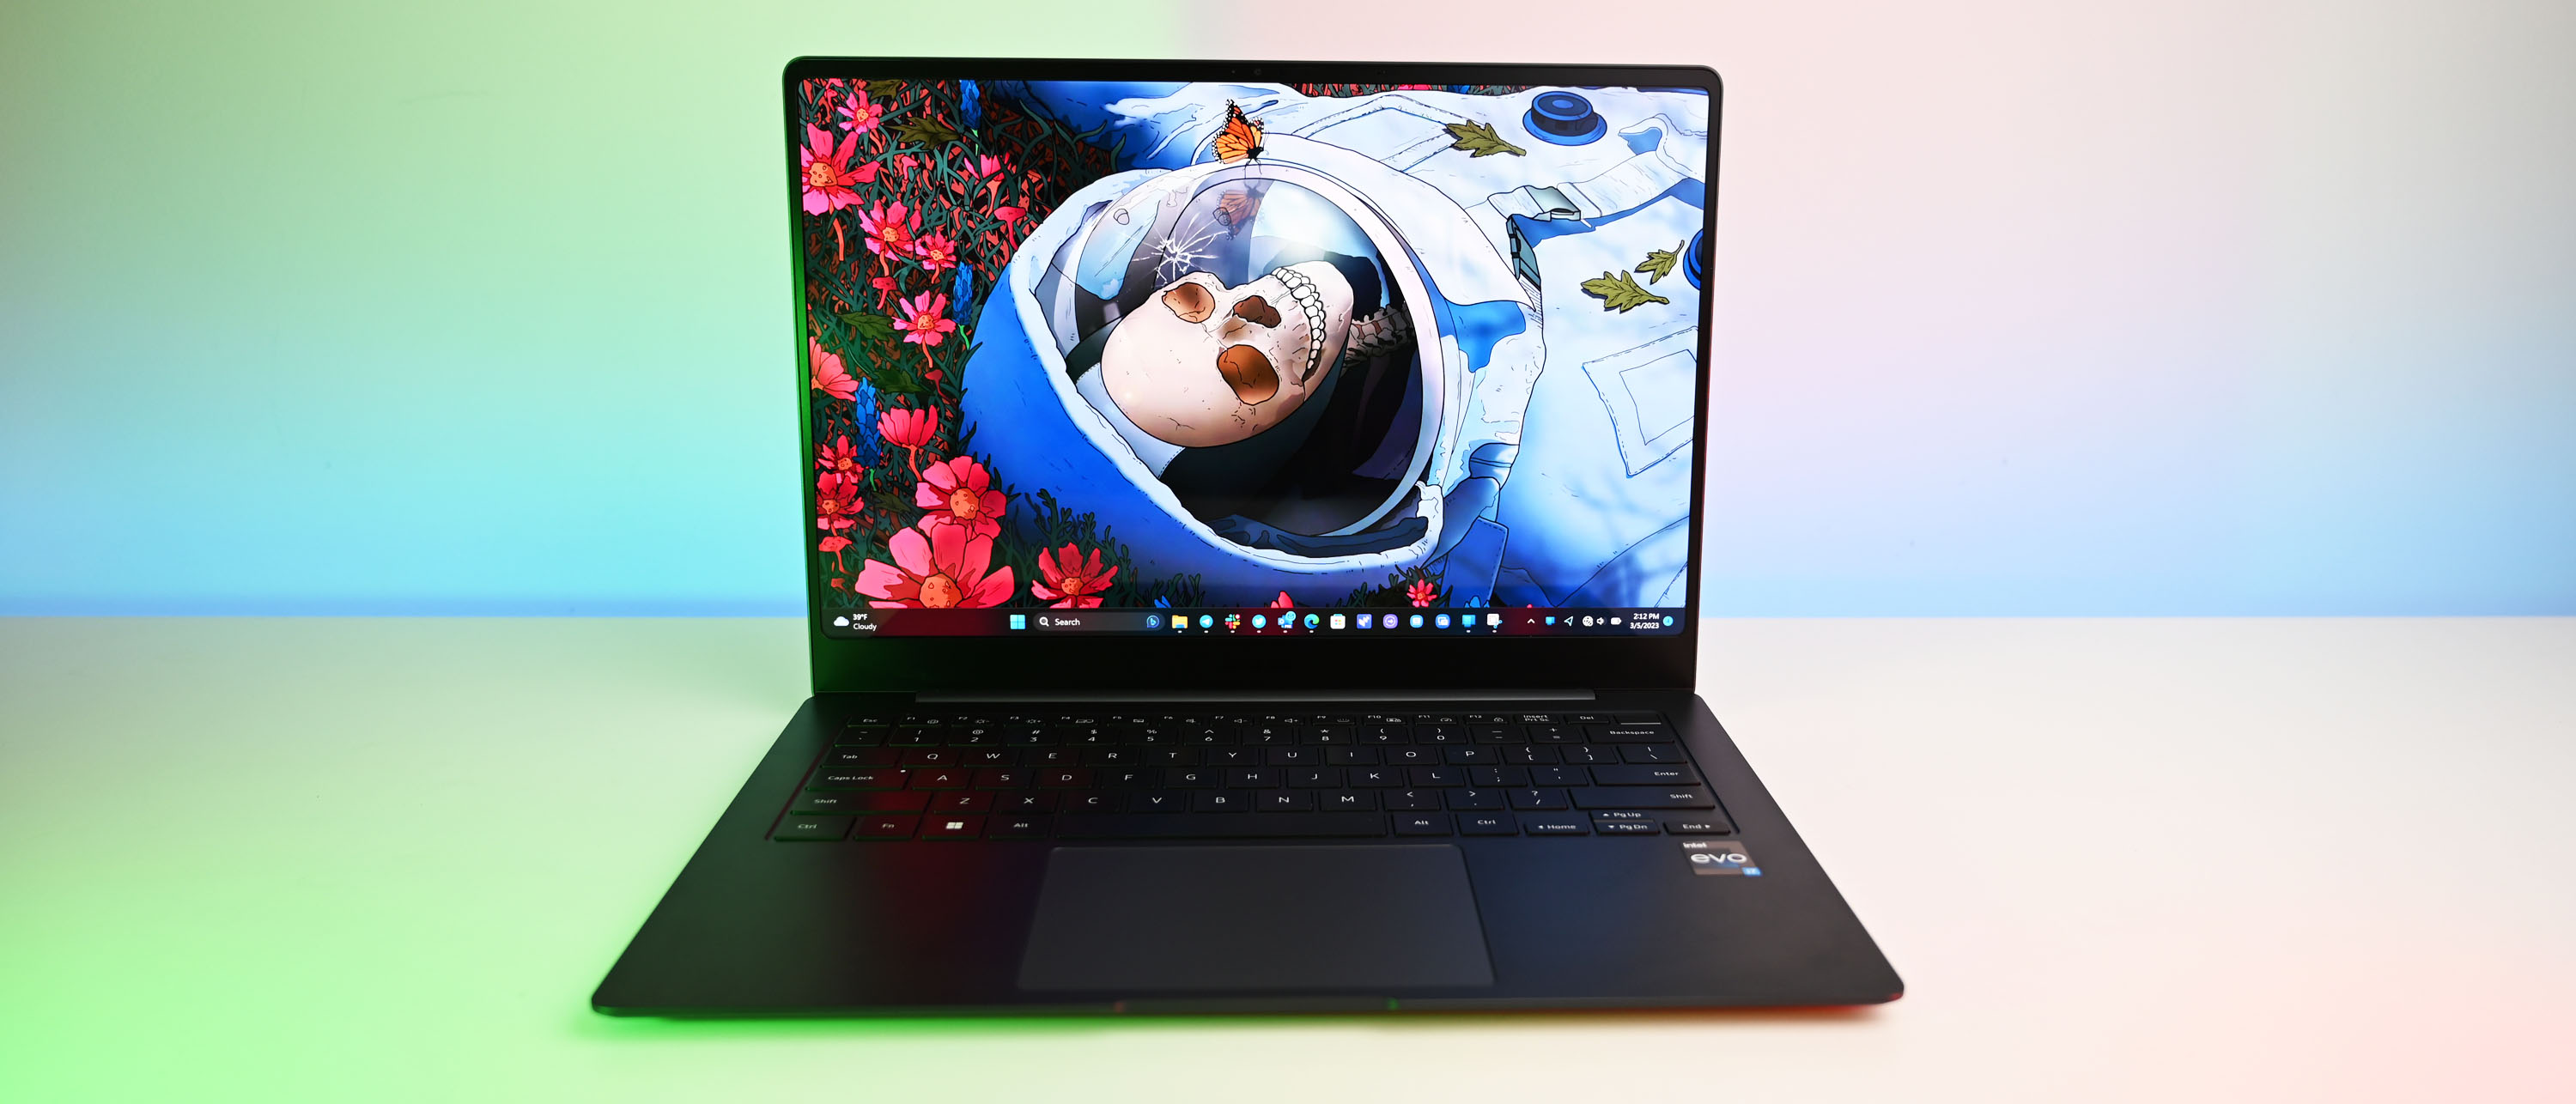 Prime Day 2023: The Samsung Galaxy Book3 360 laptop on sale for